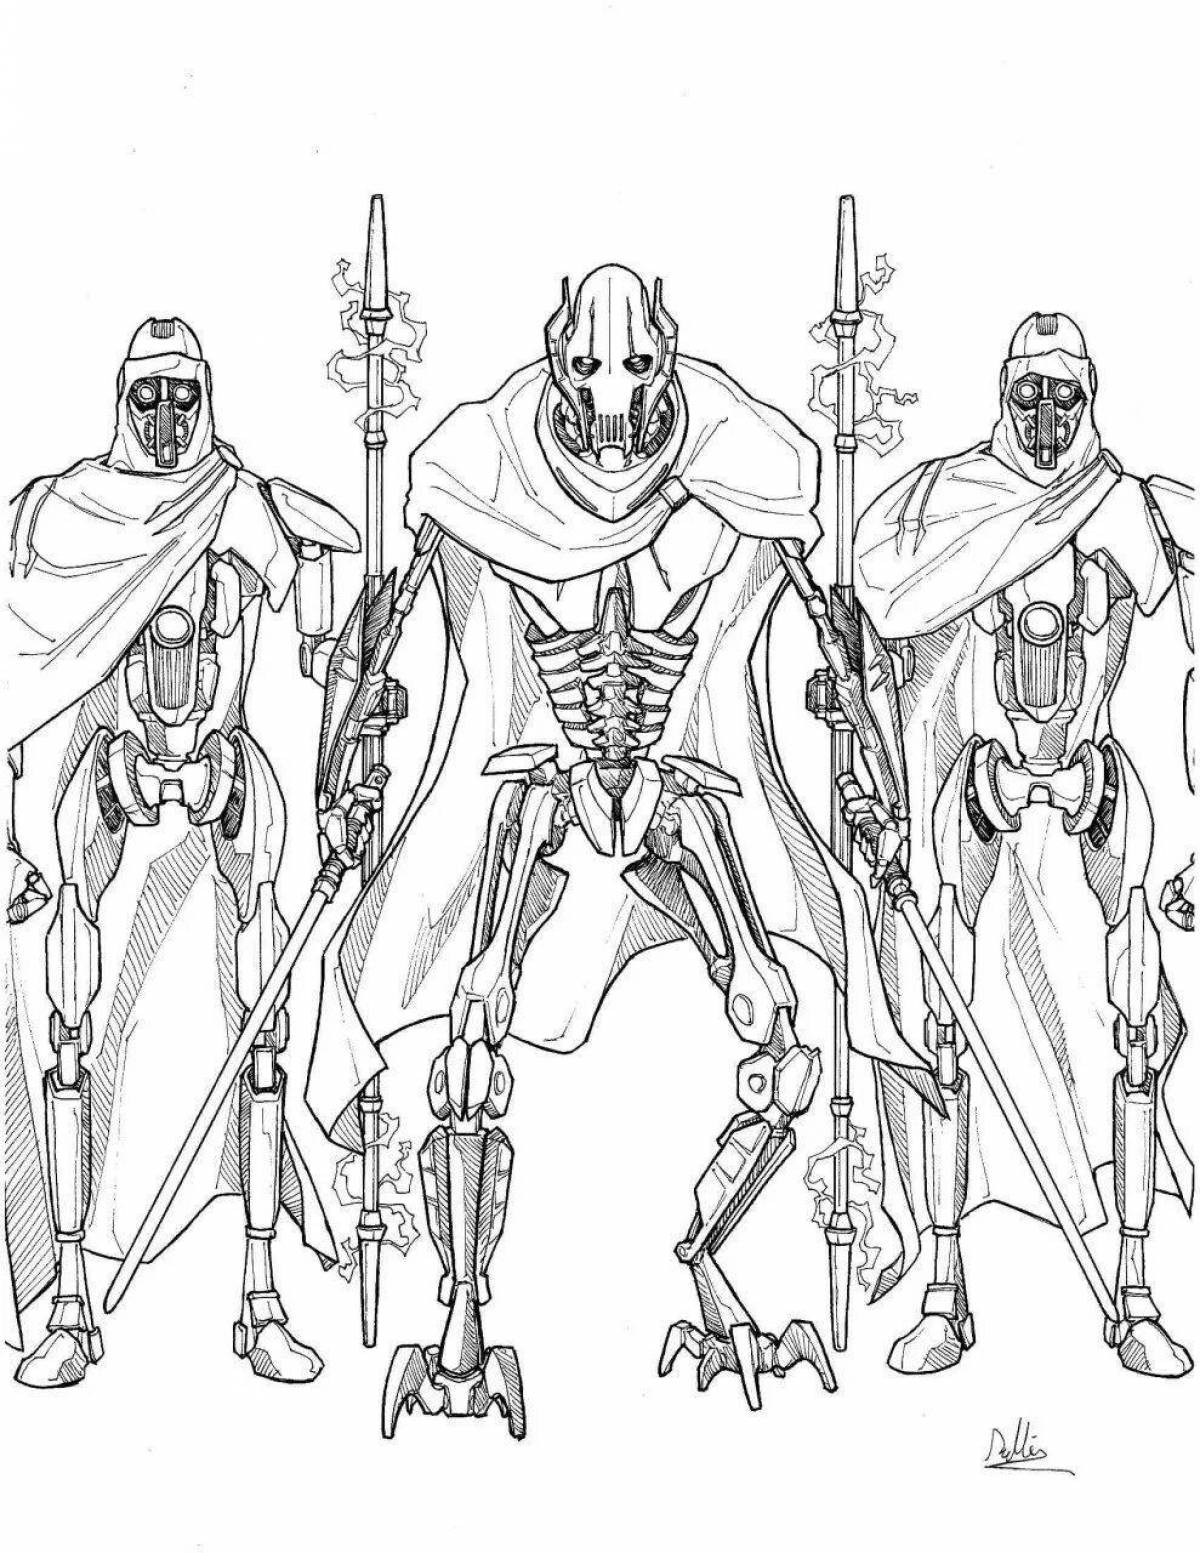 General grievous shining coloring page